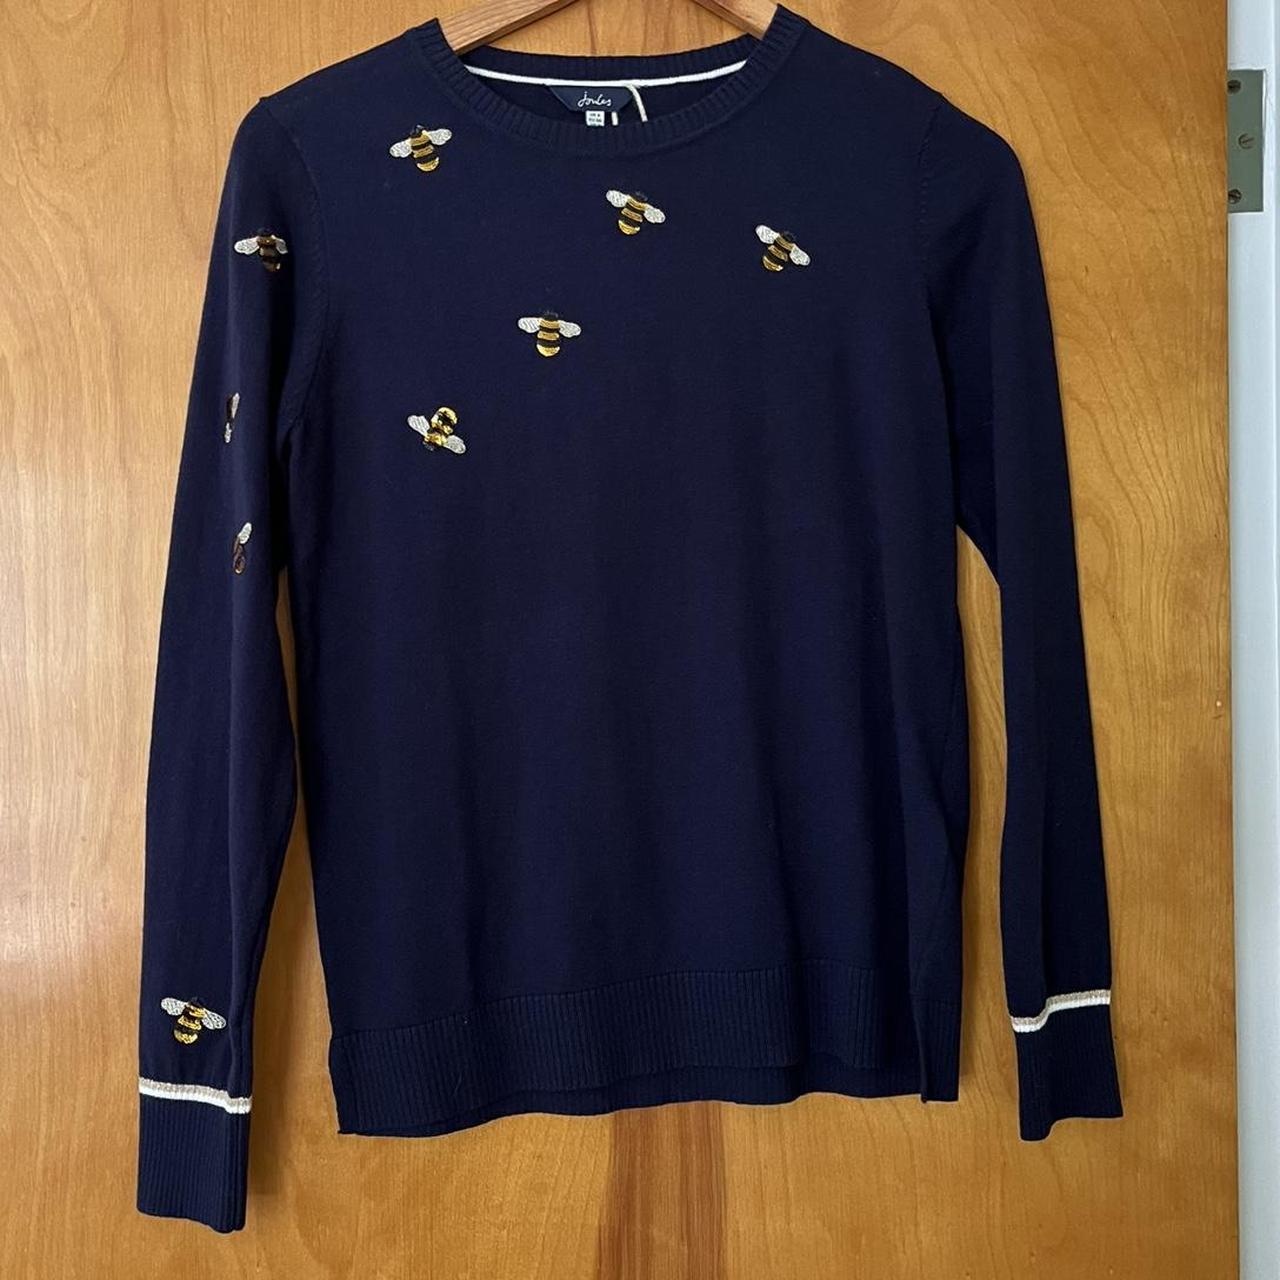 Joules Women's Navy and Gold Jumper (2)